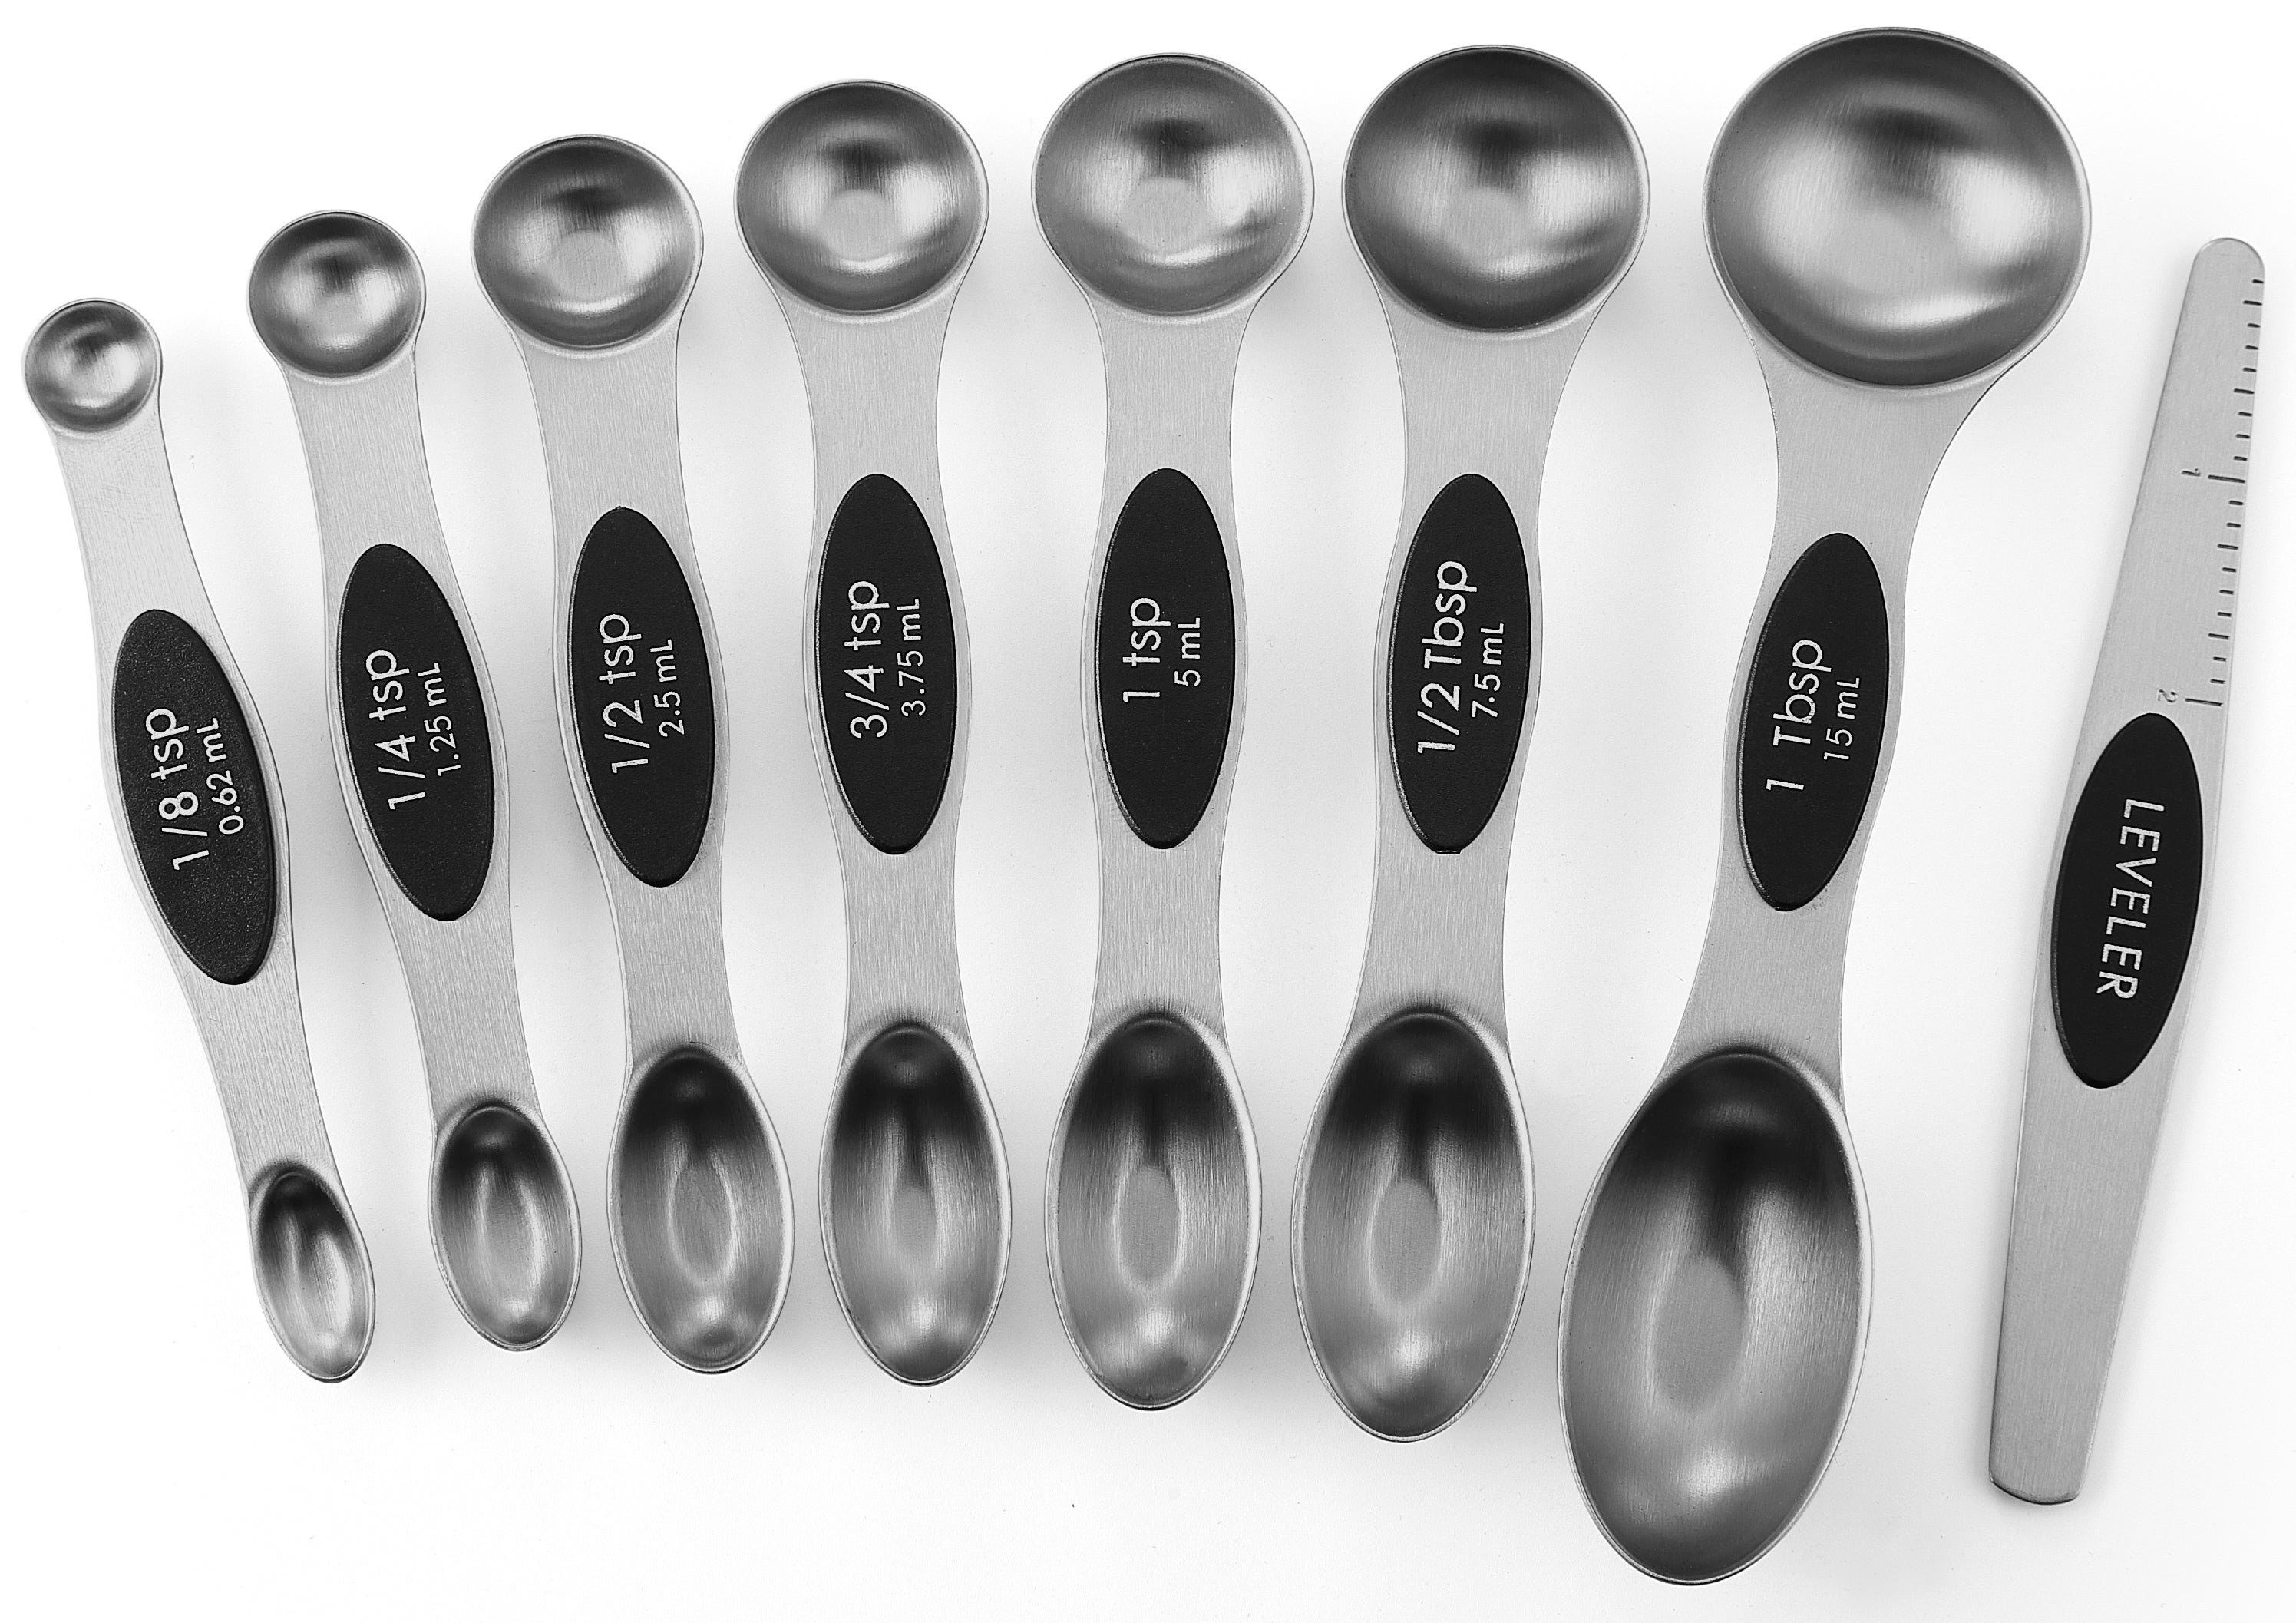 Spring Chef Magnetic Measuring Spoons Set, Dual Sided, Stainless Steel,  Fits in Spice Jars, Sapphire, Set of 8